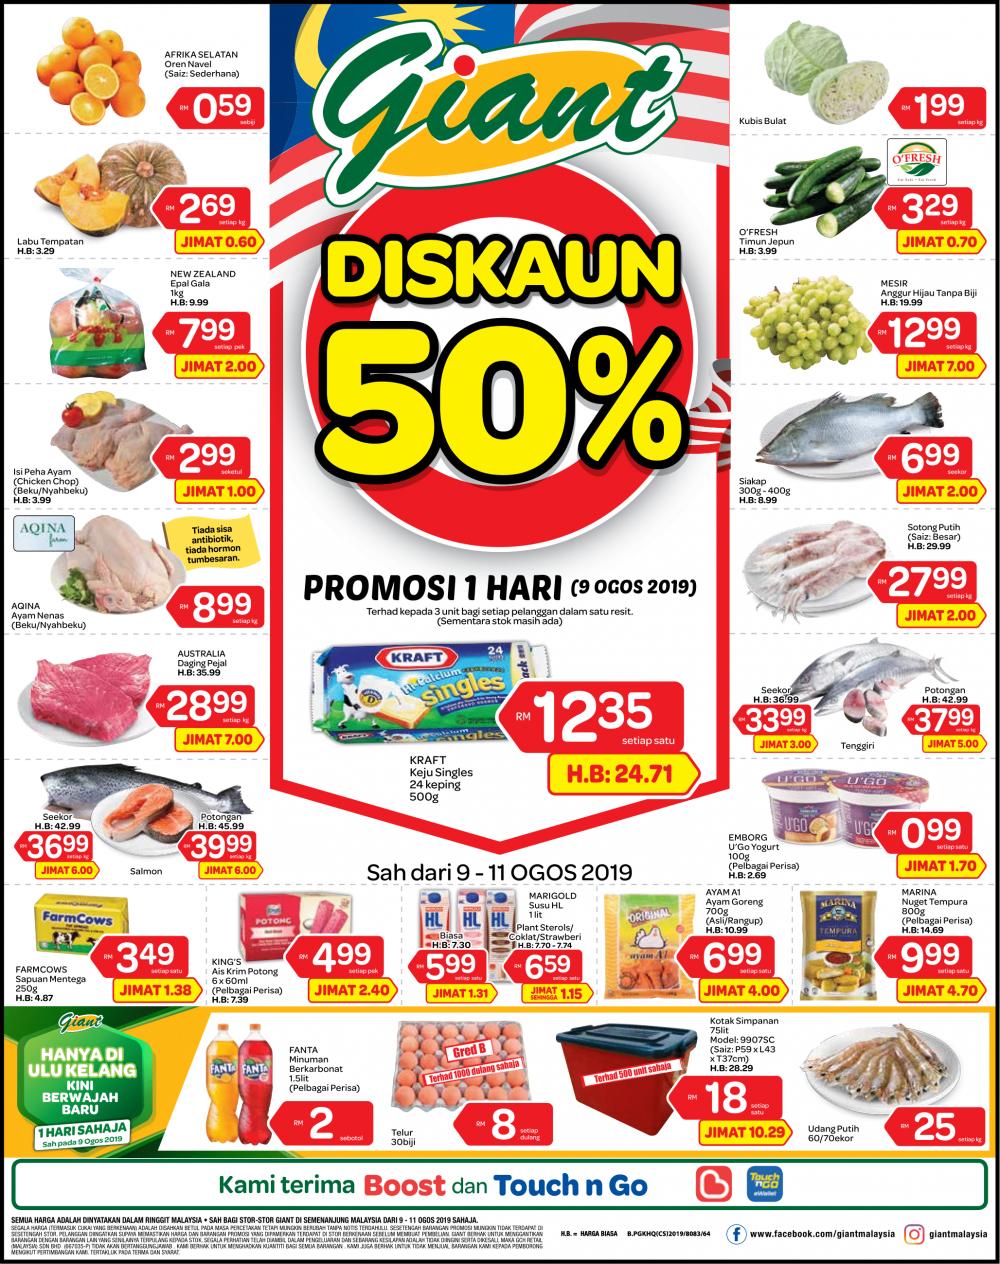 Giant Fresh Items Promotion (9 August 2019 - 11 August 2019)